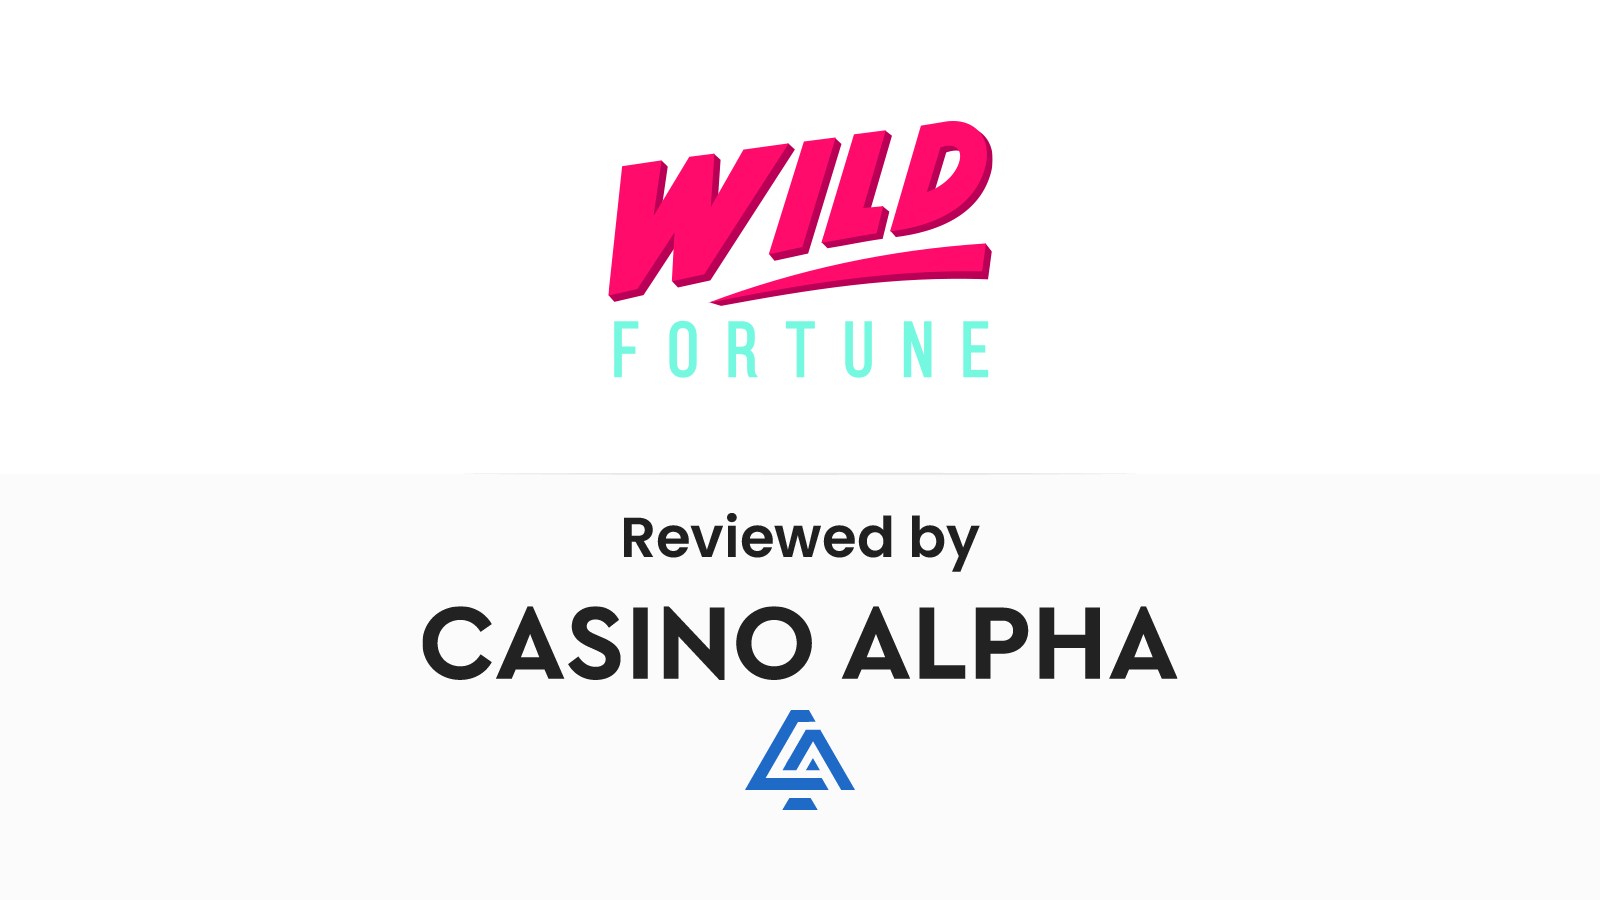 Wild Fortune Casino Review & Offers